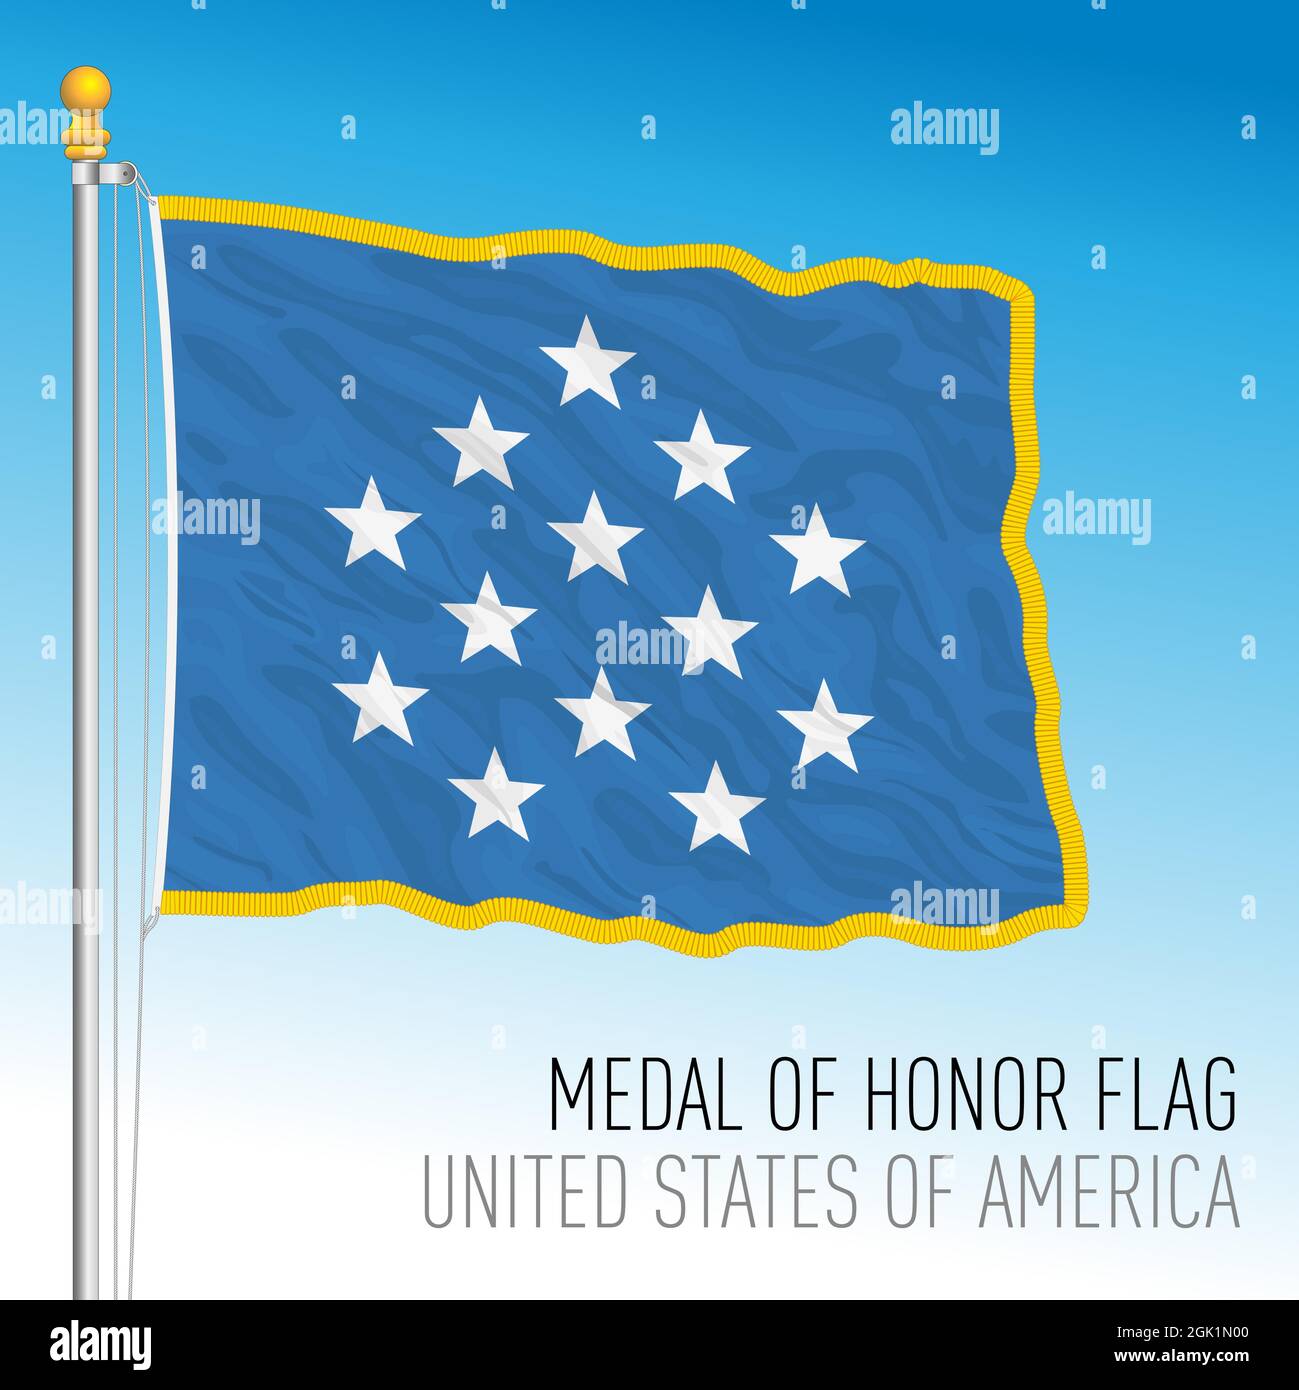 US Medal of Honor flag, United States of America, vector illustration Stock Vector